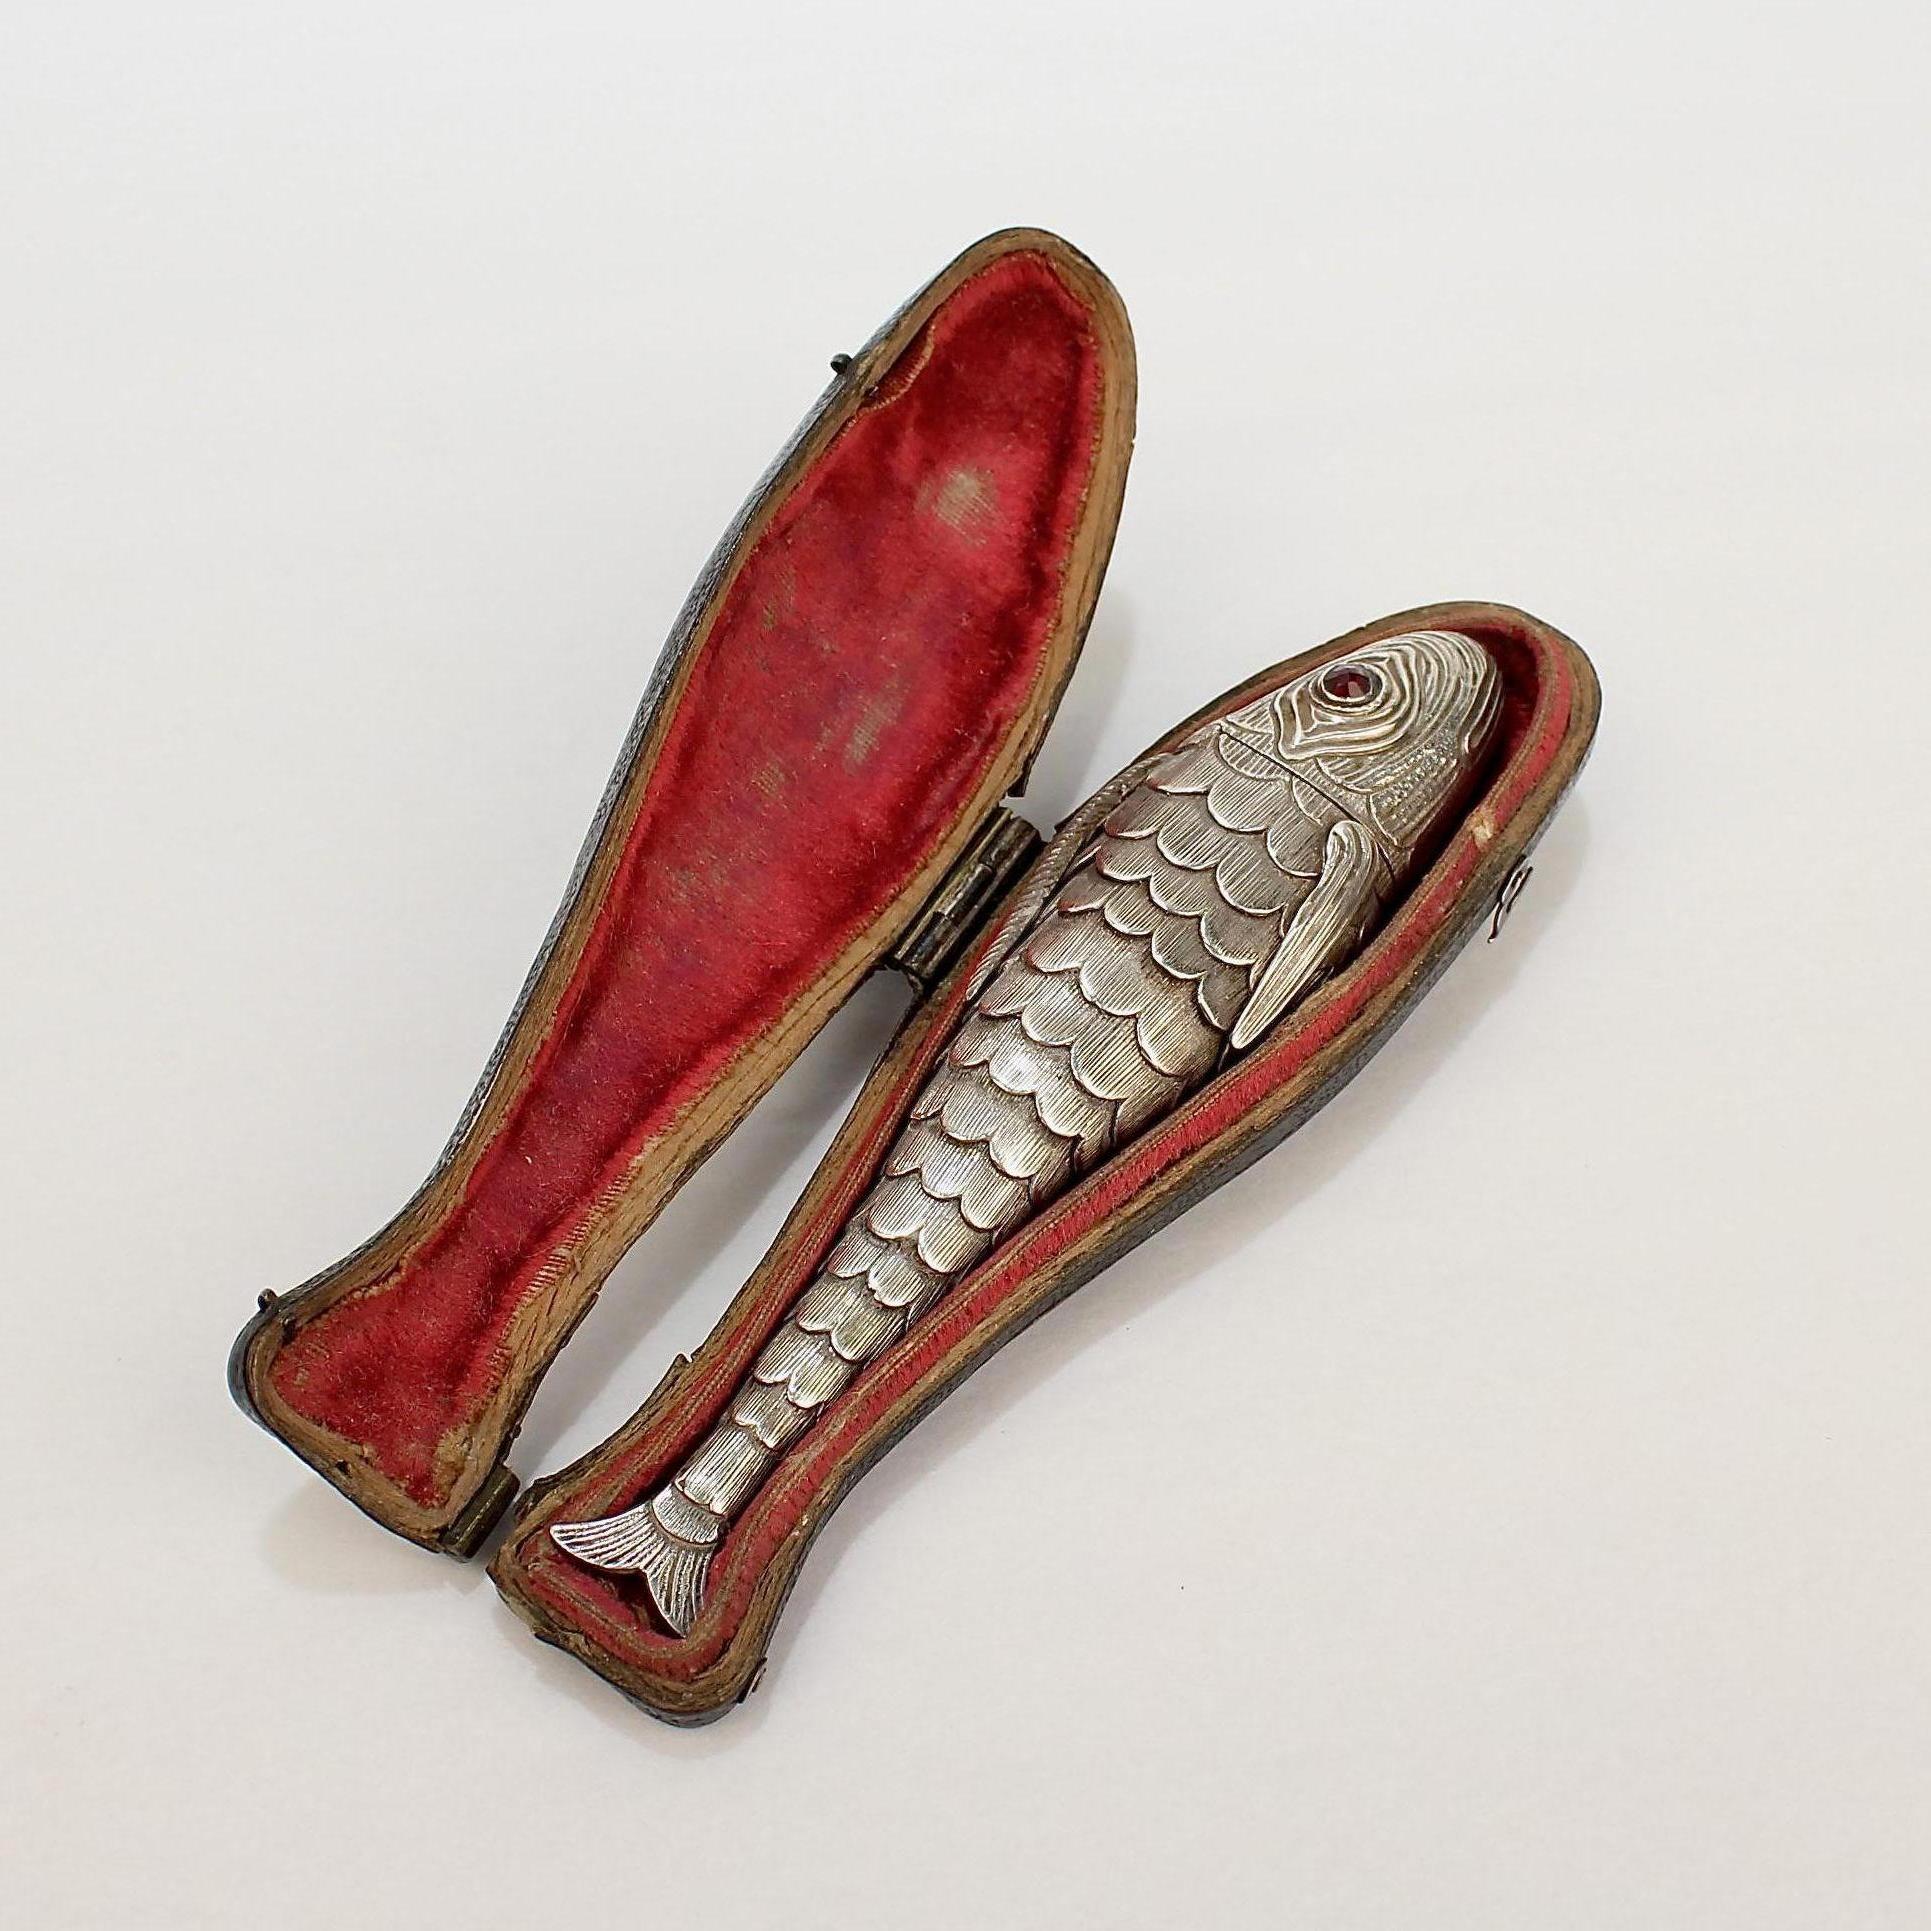 A very fine solid silver antique figural vinaigrette.

In the form of a fish with faceted garnet gemstone eyes and engraved fins and scales.

Its hinged cover in the form of the fish's head opens to reveal a sponge compartment. The body supports 7